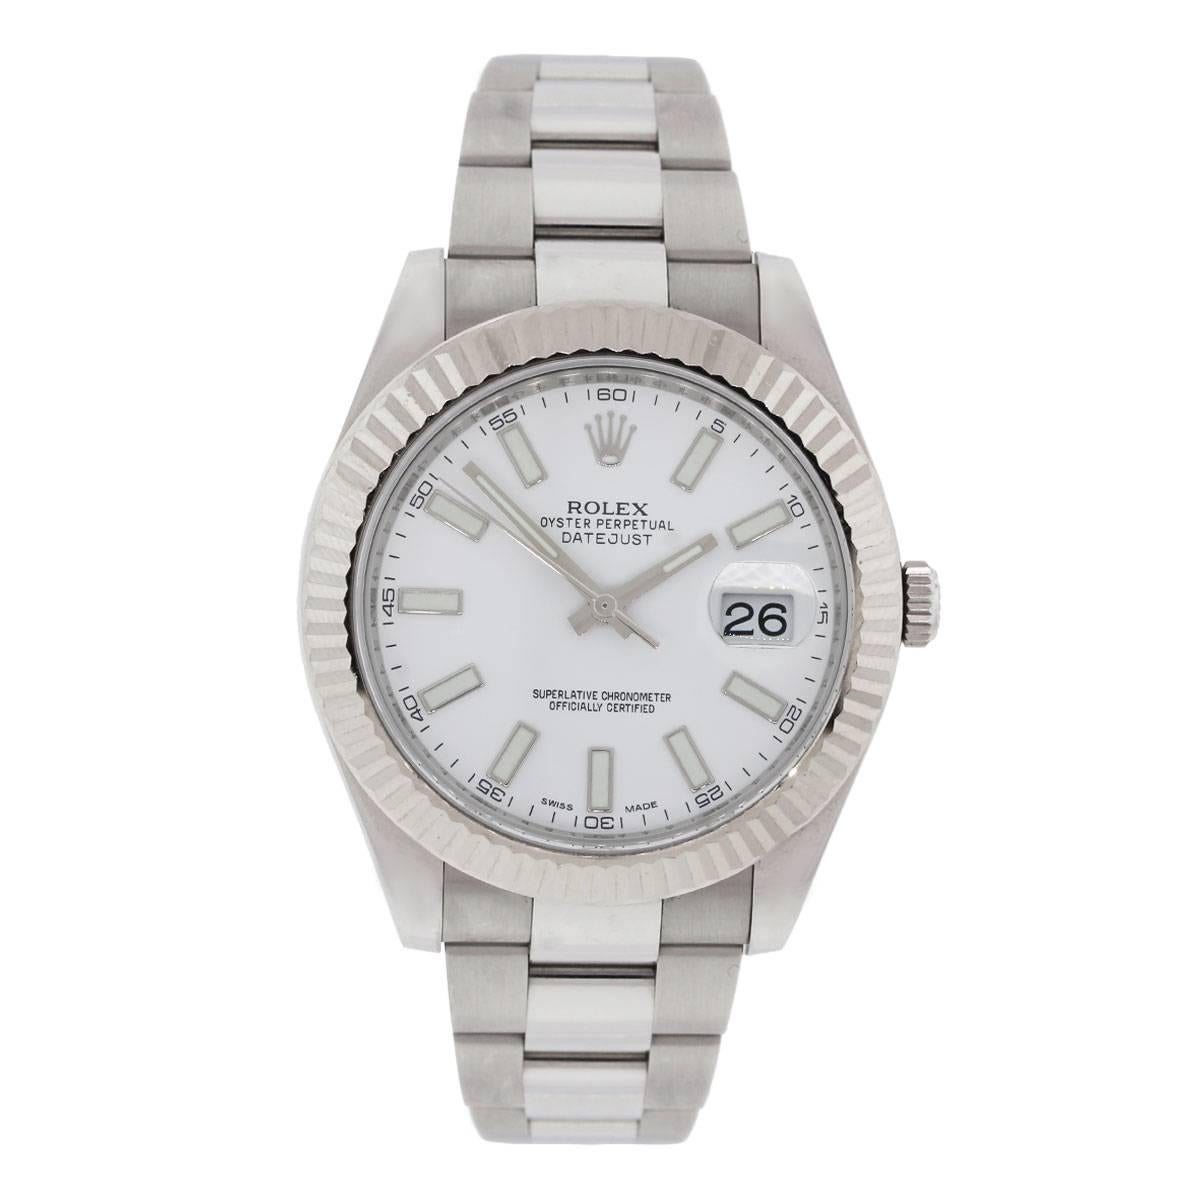 Brand: Rolex
MPN: 116334
Model: Datejust II
Serial: Scrambled (2009 or newer)
Case Material: Stainless Steel
Case Diameter: 41mm
Bezel: Fluted bezel
Dial: White dial with luminescent hour markers and date window at the 3 o’clock position
Bracelet: